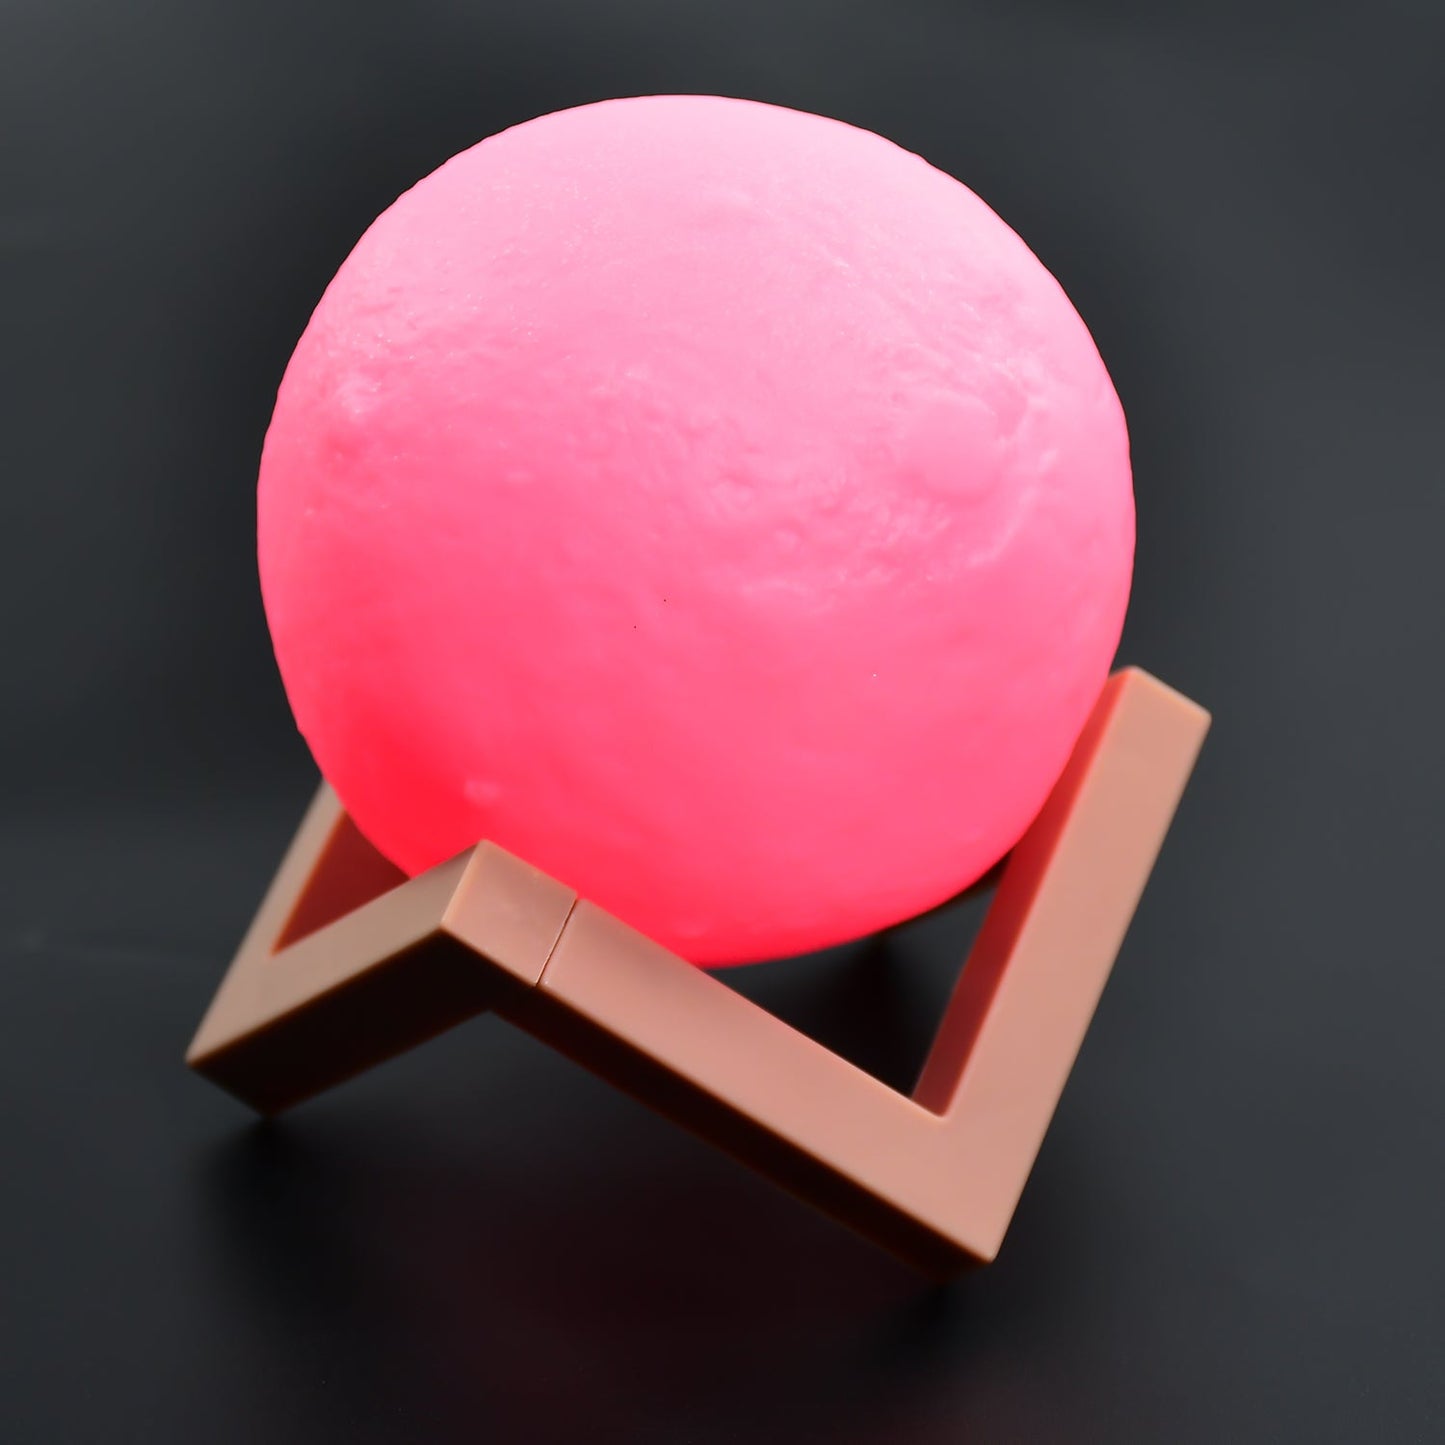 6274 Moon Night Lamp Pink Color with Wooden Stand Night Lamp for Bedroom DeoDap